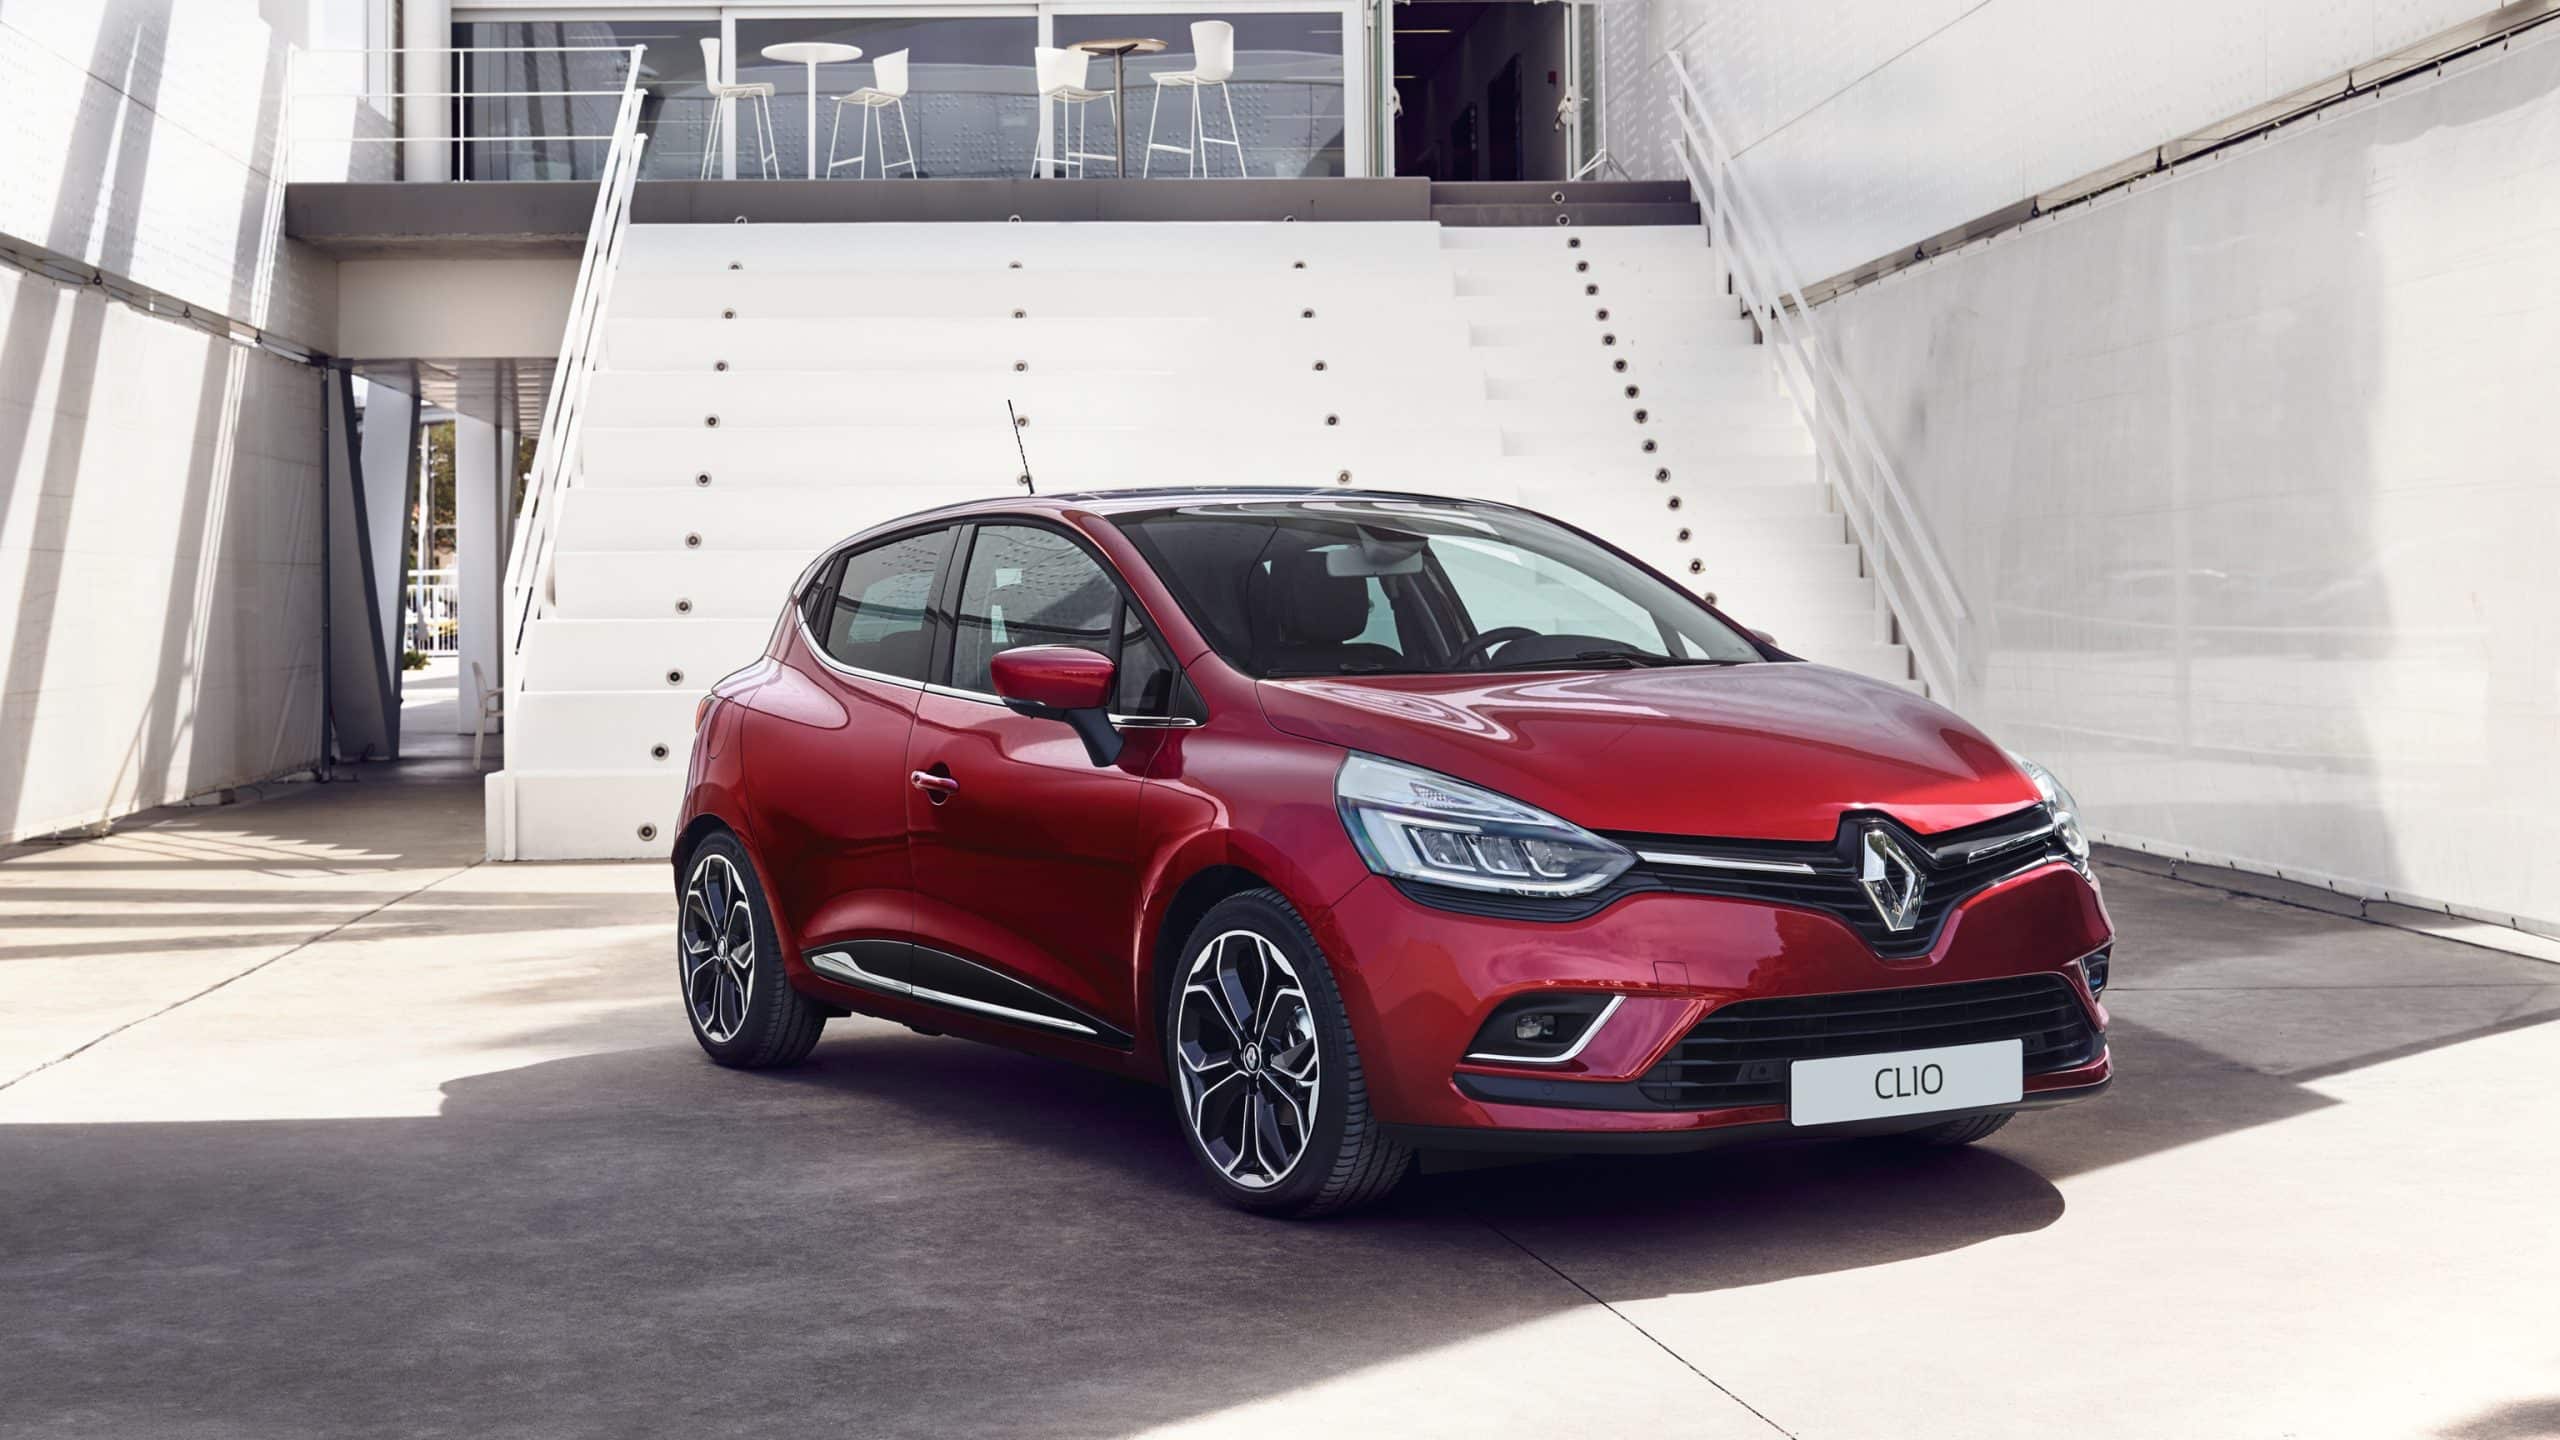 2017 Renault Clio red color front side view park outside house 4k hd wallpaper